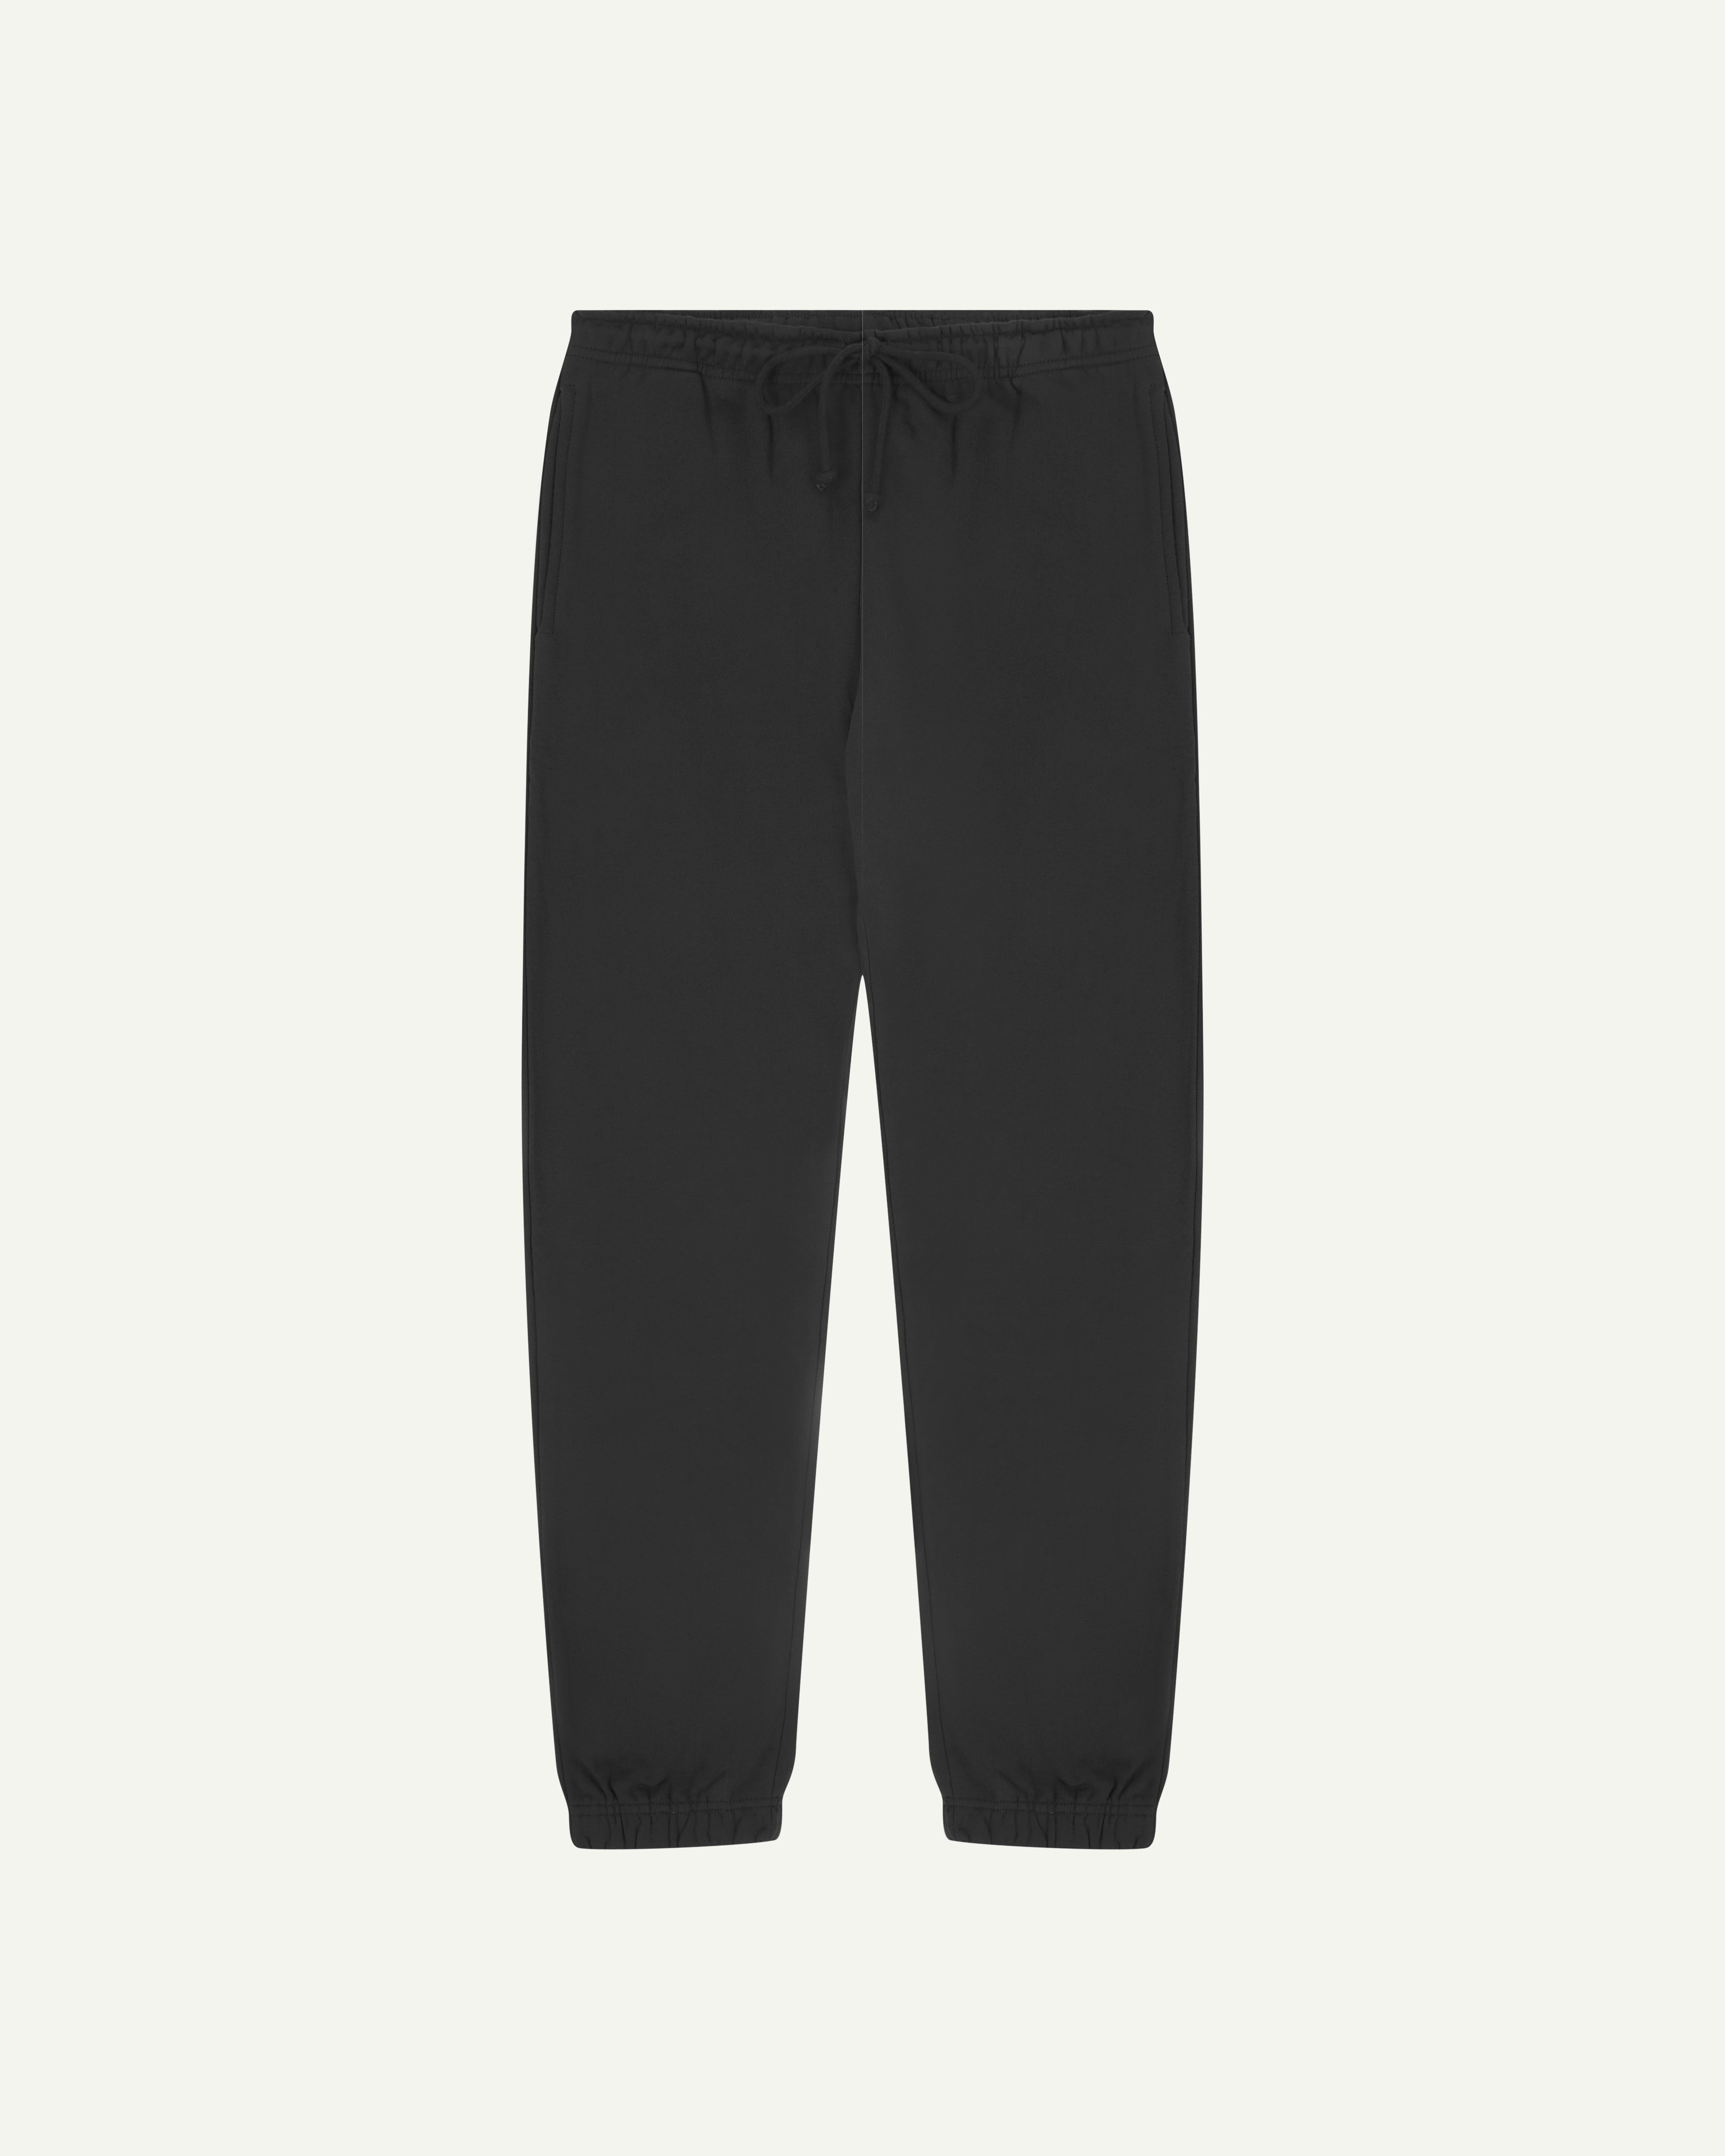 Front view of dark grey organic cotton Jogging Pants for men by Uskees.